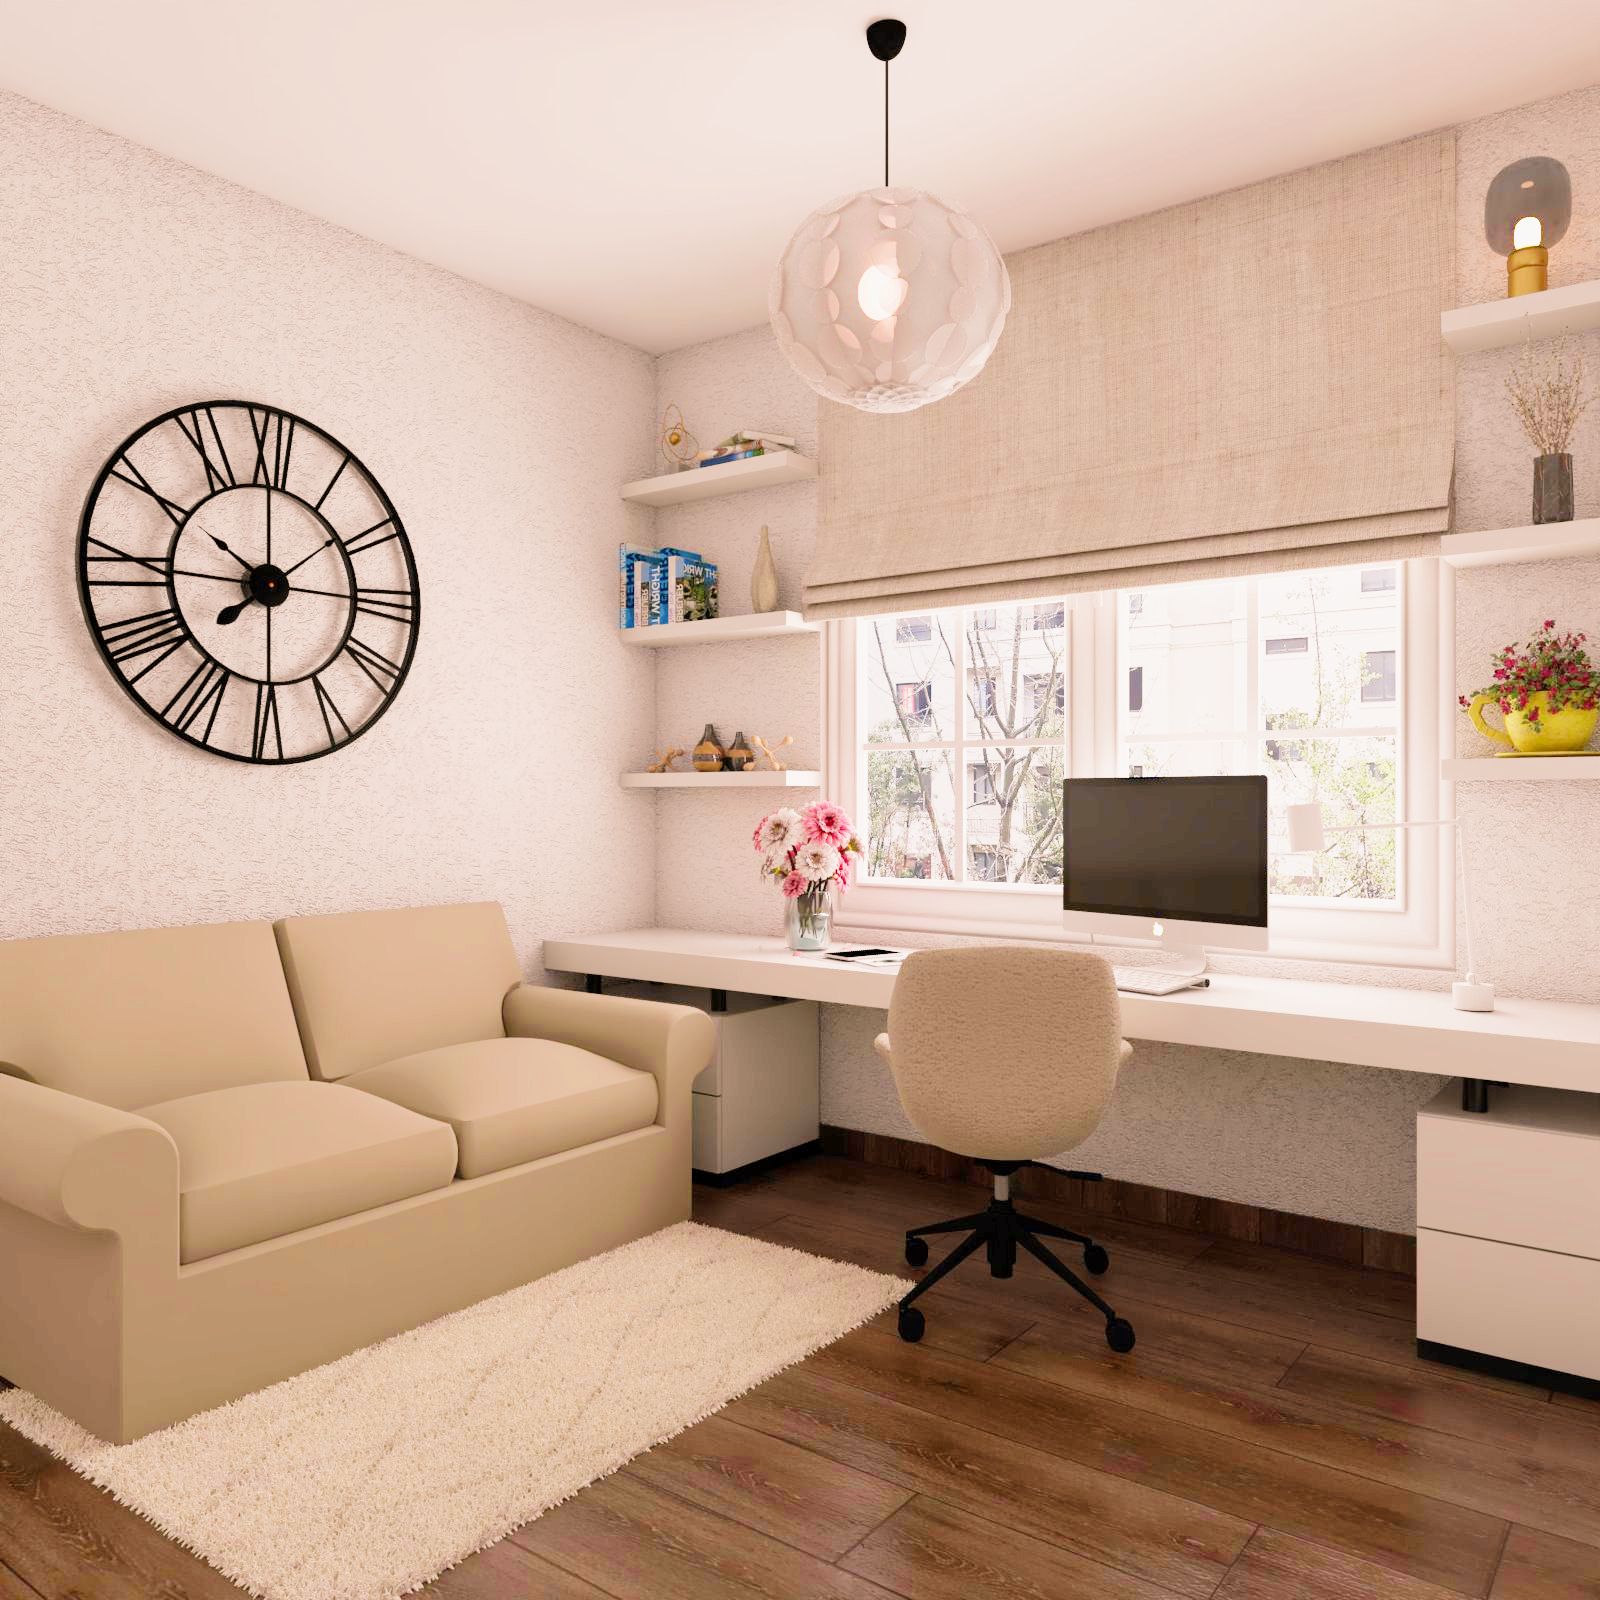 Minimal Frosty White Home Office Design With Spacious Study Table And 2-Seater Beige Sofa